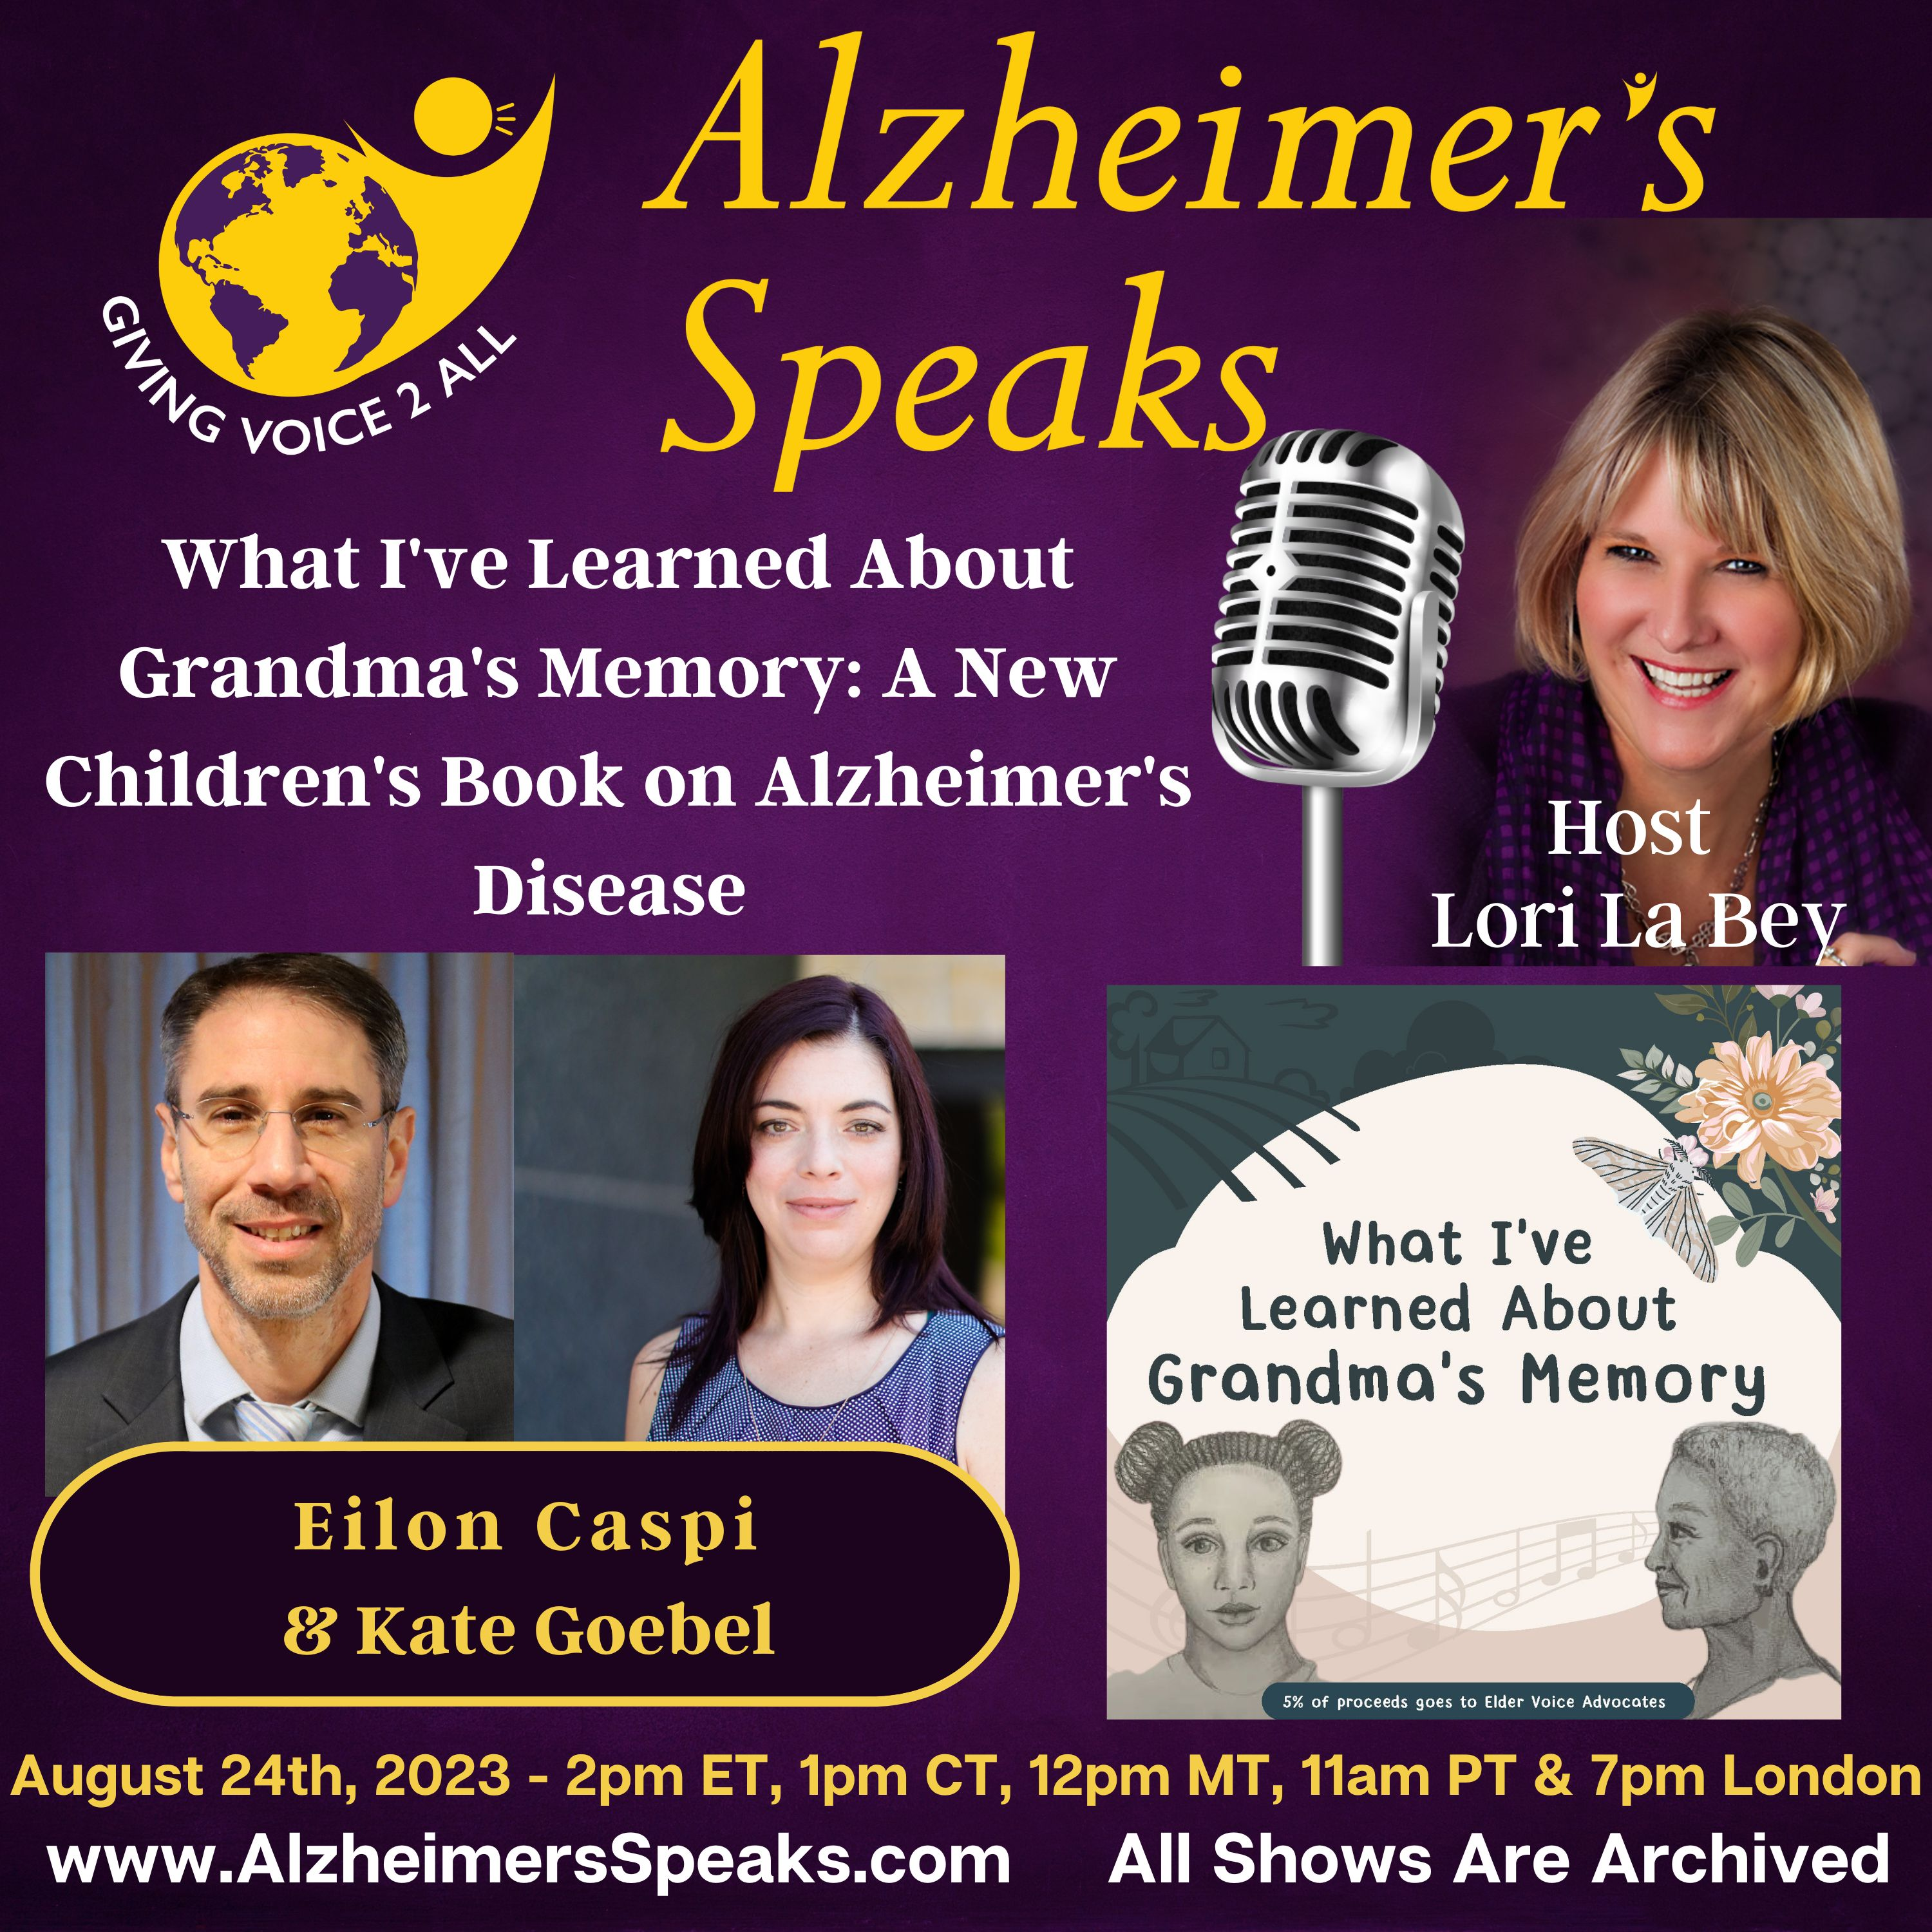 What I’ve Learned About Grandma’s Memory: A New Children’s Book on Alzheimer’s Disease